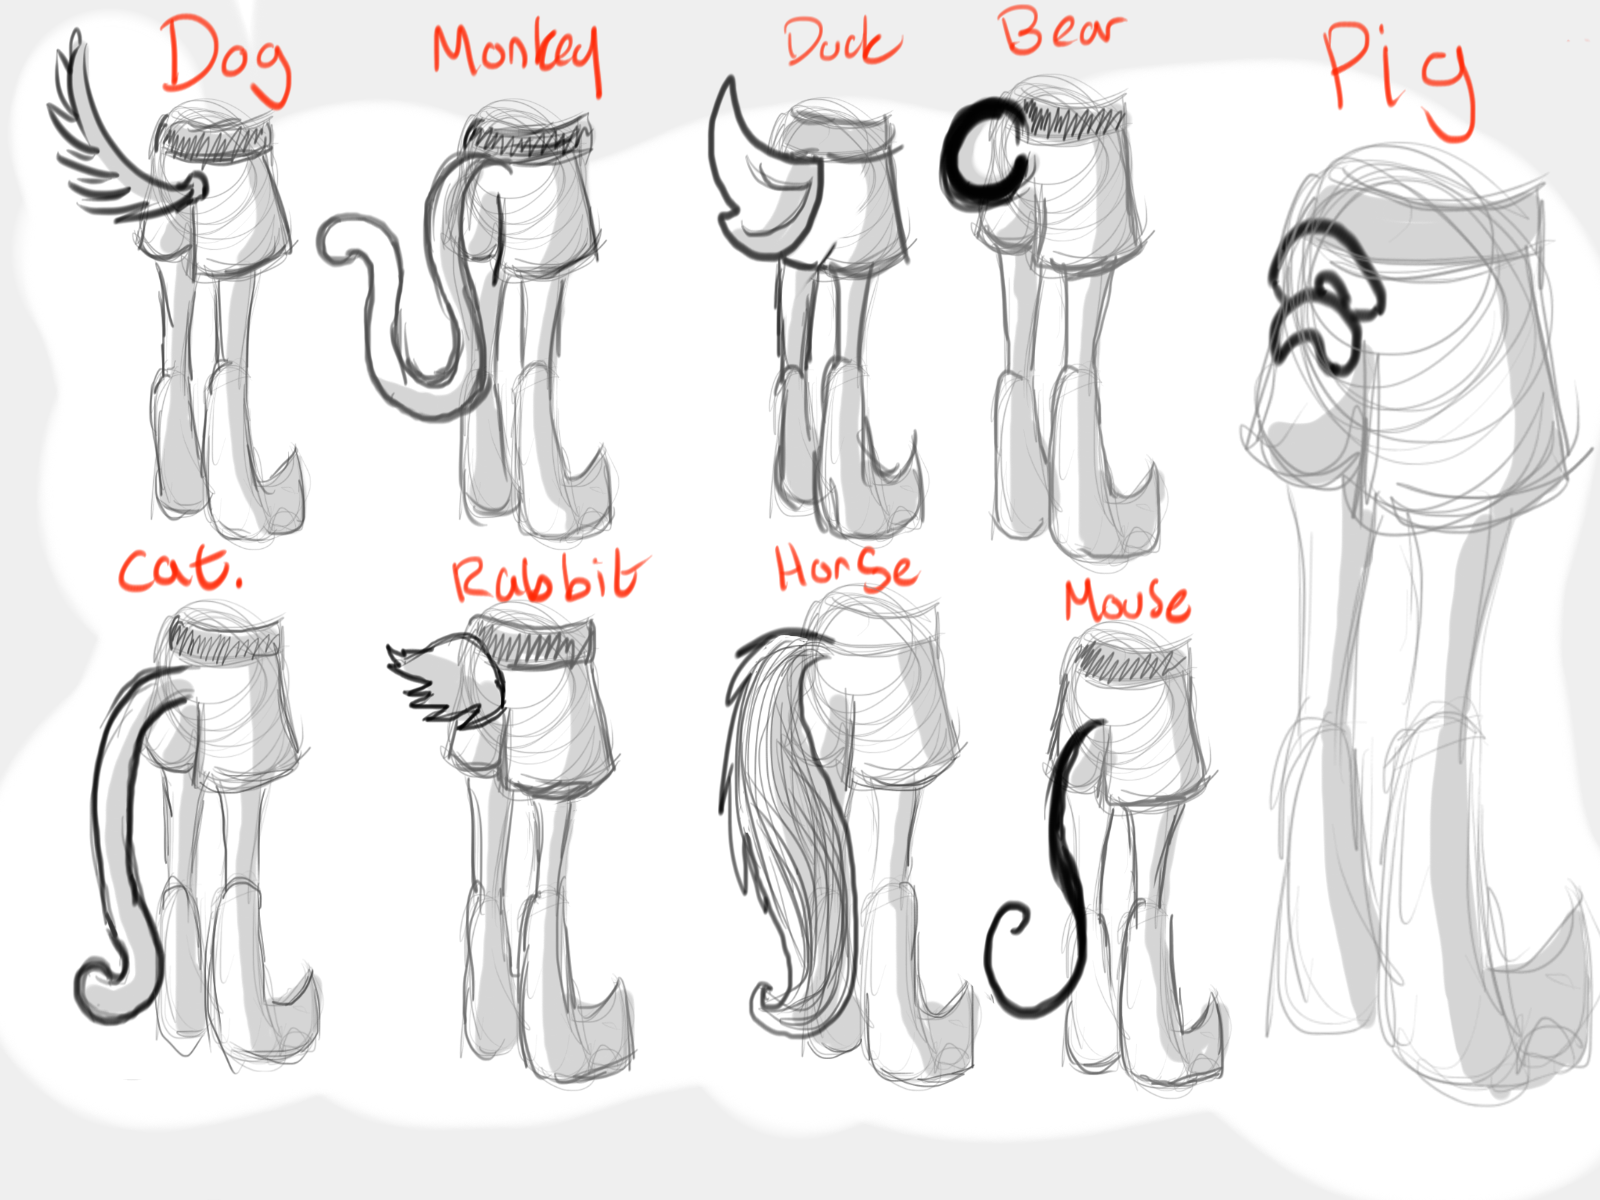 Toontown- Tails. by swaggerpede on DeviantArt